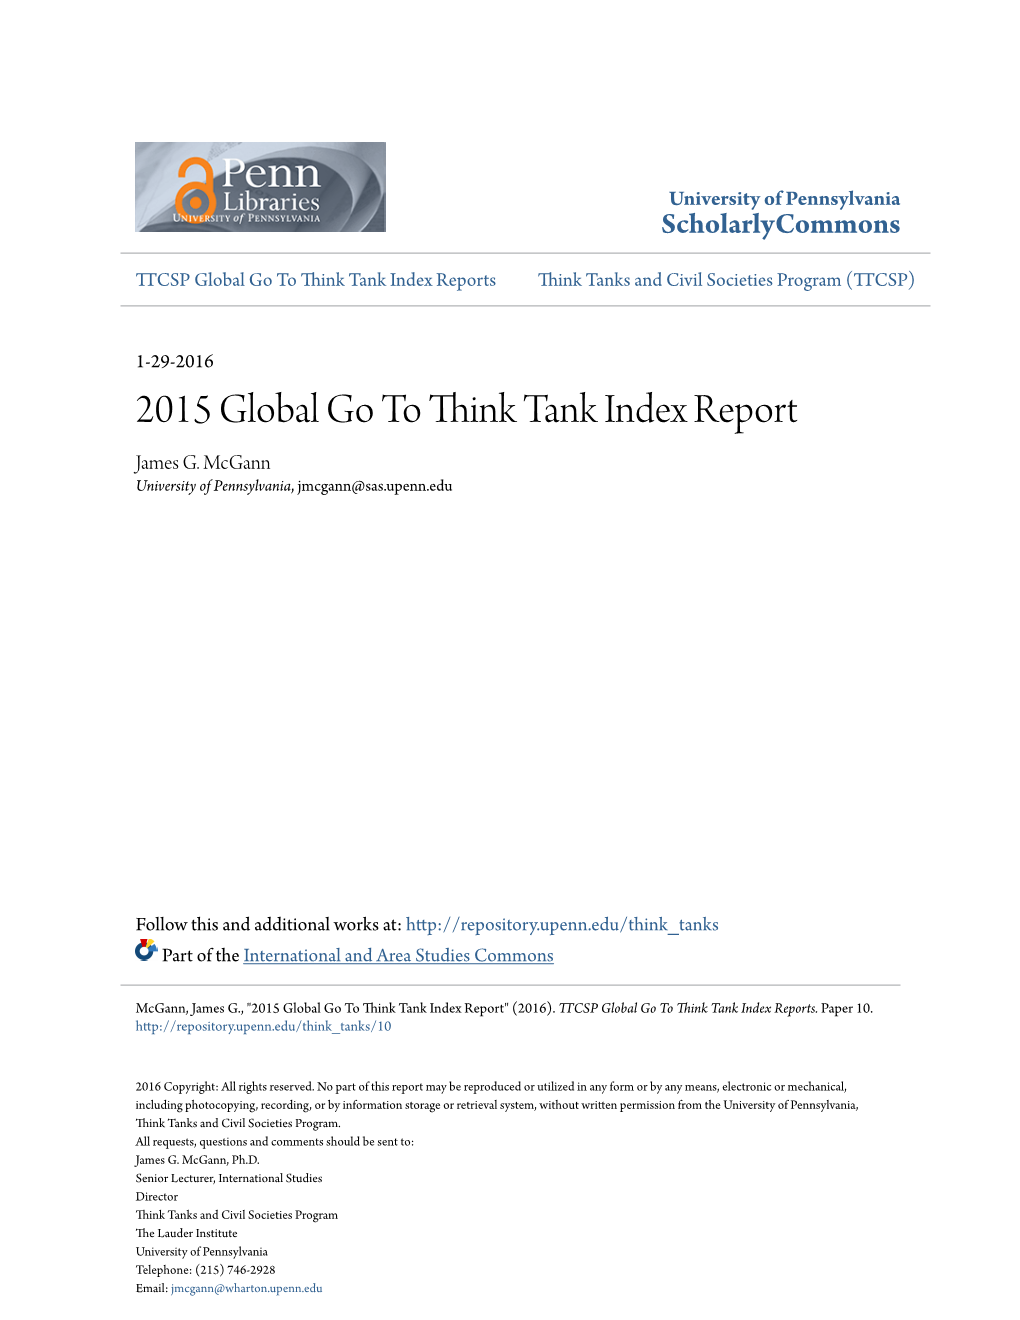 2015 Global Go to Think Tank Index Report